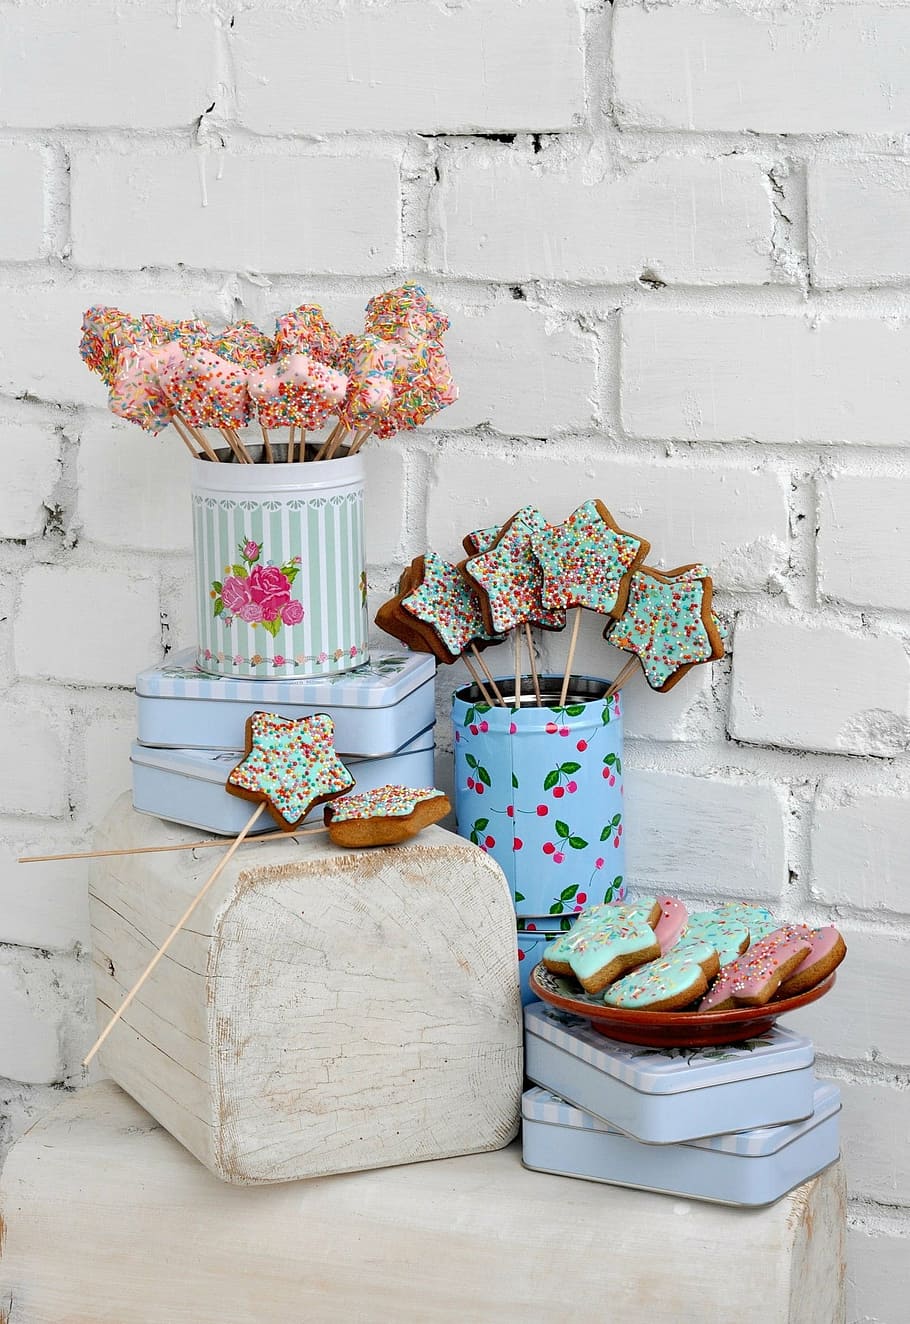 Assorted Candy Lot, Shabby Chic, Gingerbread, Cans, - Shabby Geburtstag - HD Wallpaper 